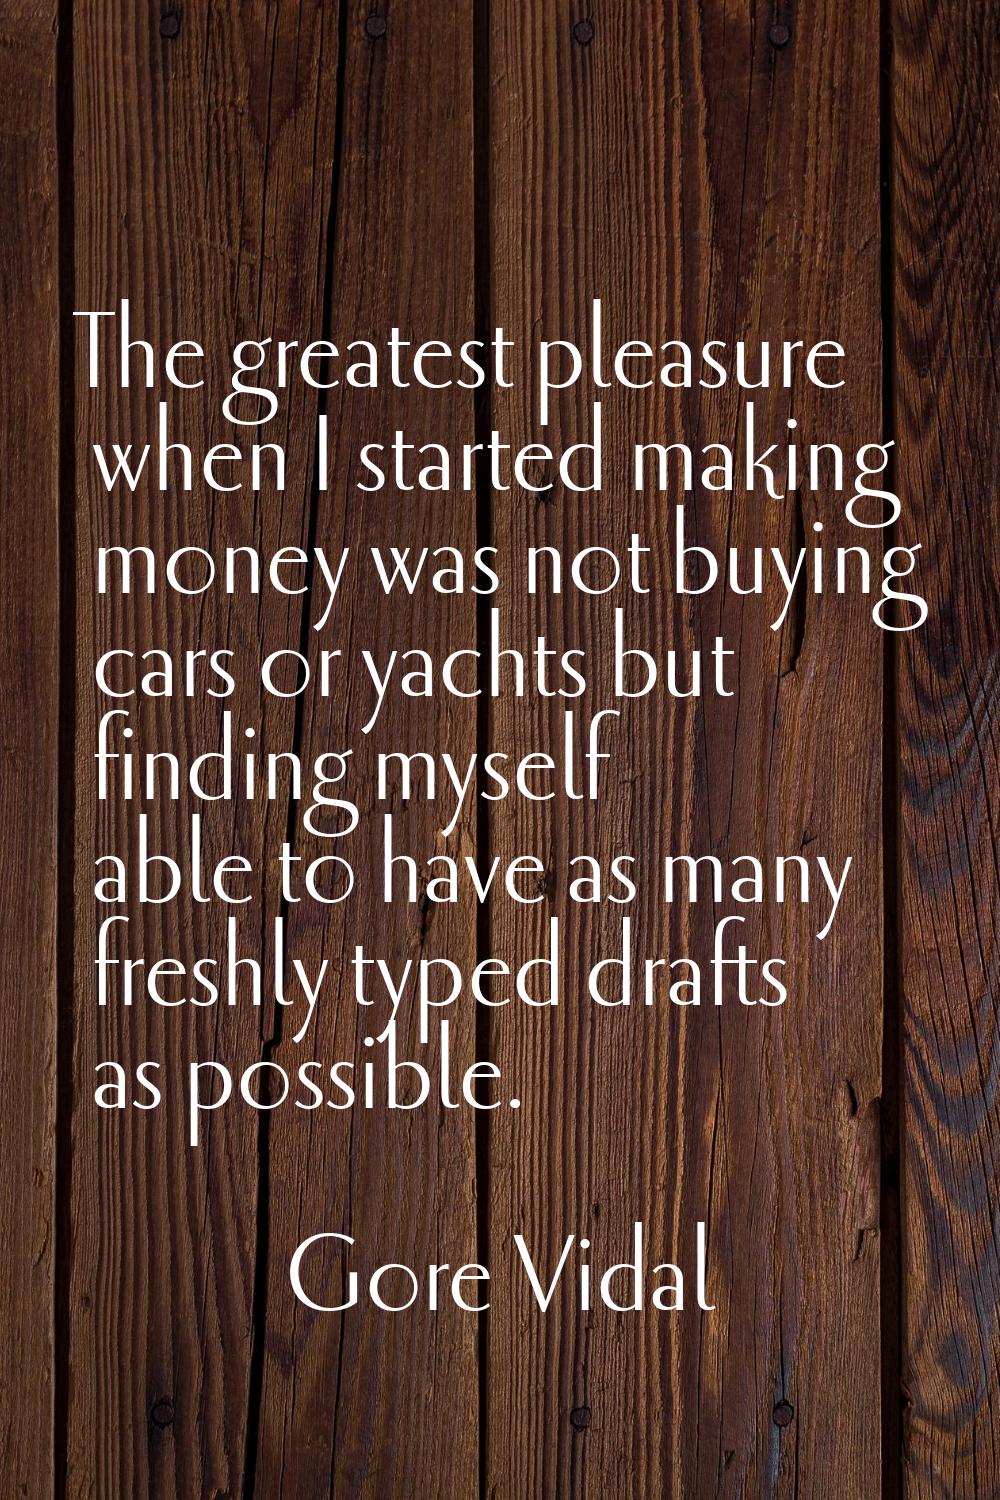 The greatest pleasure when I started making money was not buying cars or yachts but finding myself 